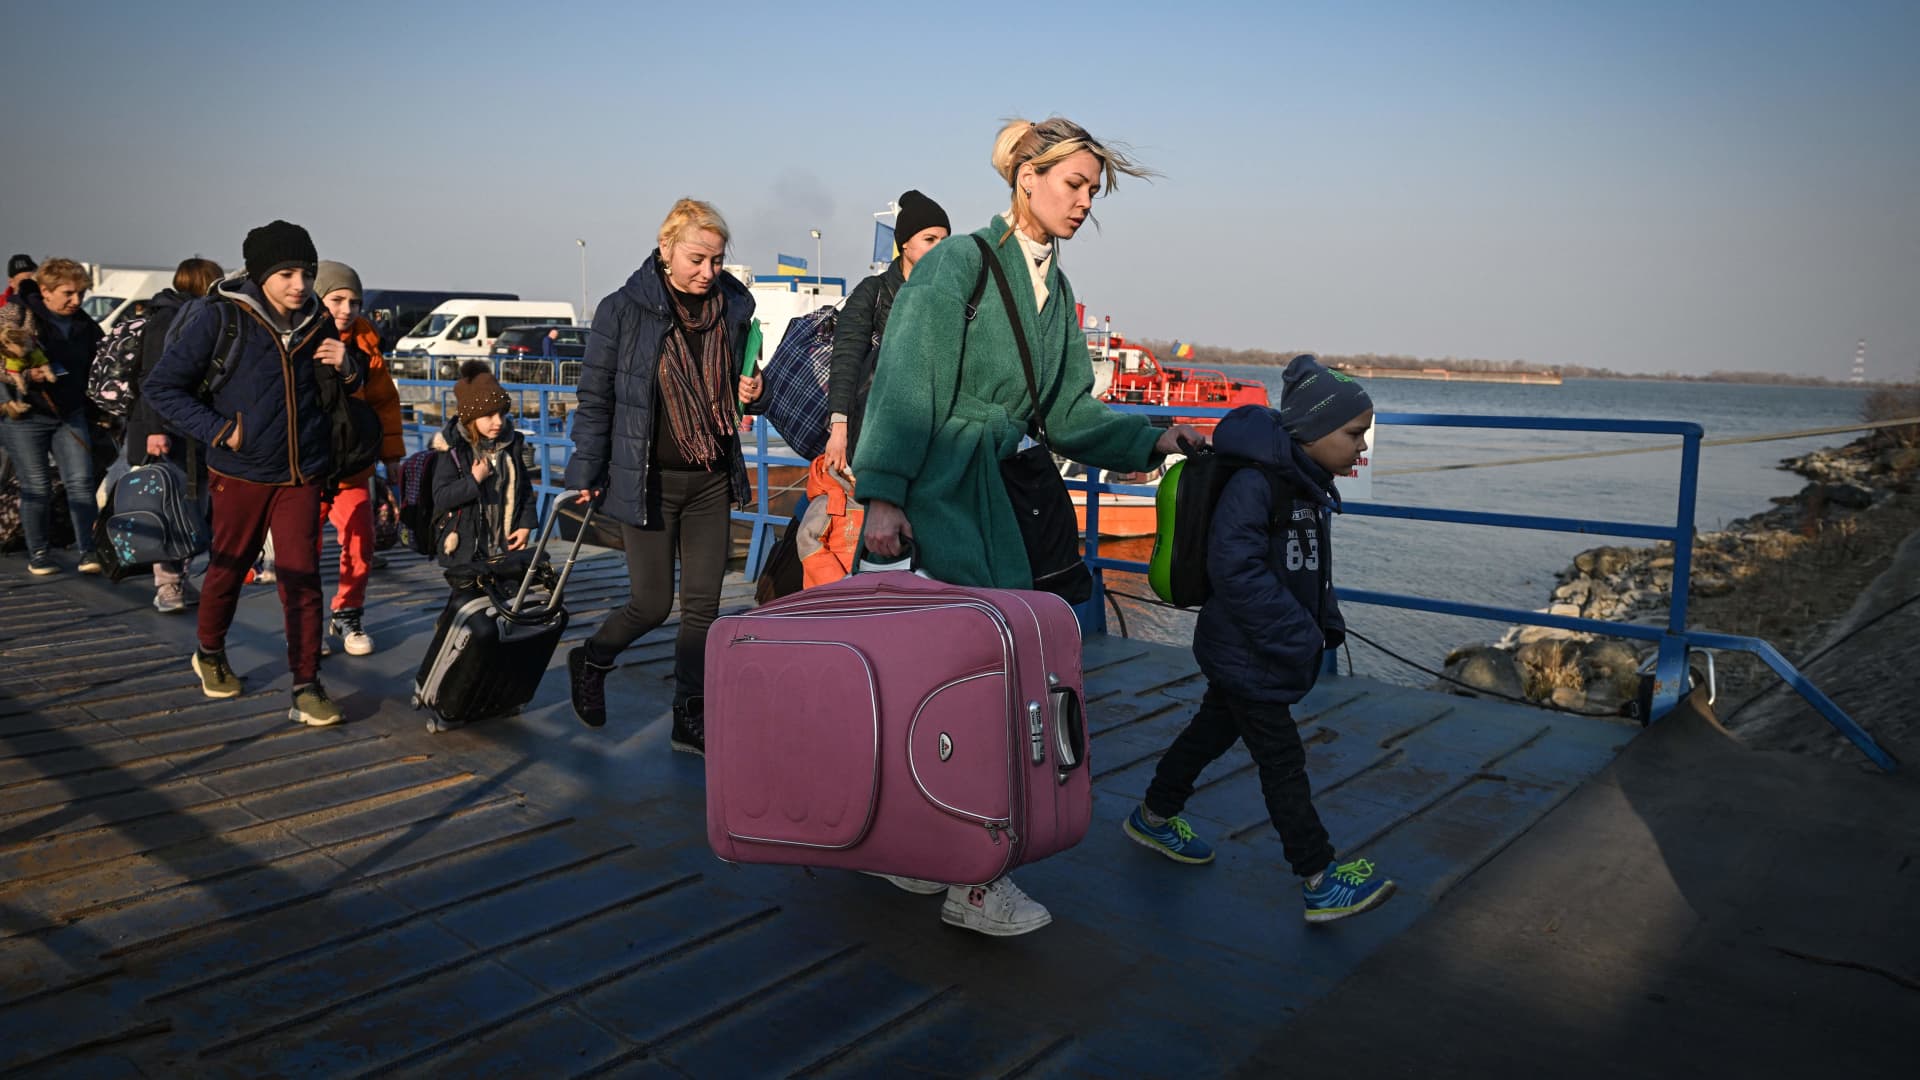 Refugees from Ukraine walk on the jetty after arriving by ferry at the Romanian-Ukrainian border point Isaccea-Orlivka on March 24, 2022.